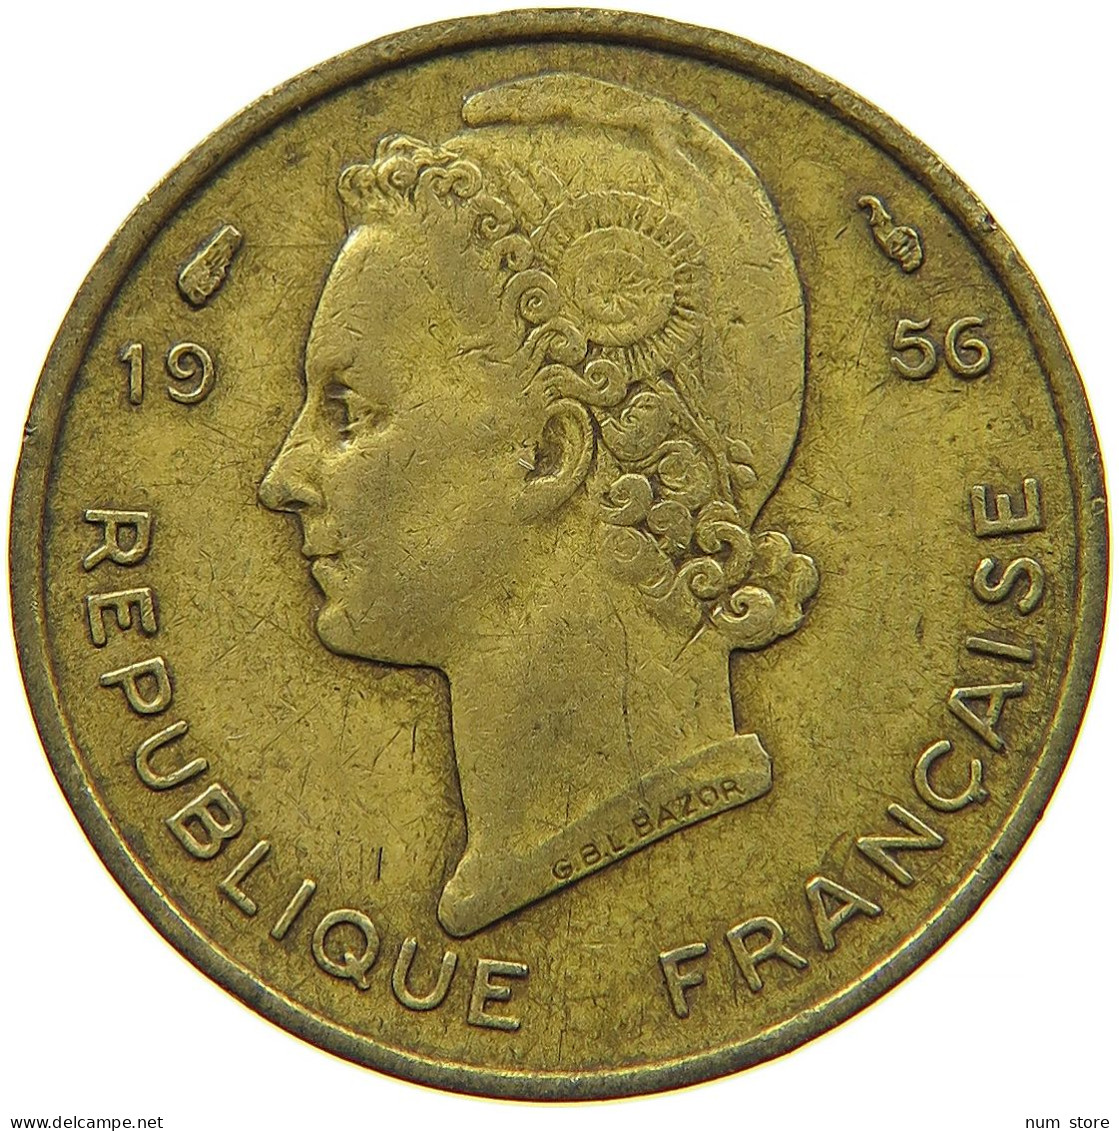 FRENCH WEST AFRICA 5 FRANCS 1956 #s088 0645 - French West Africa